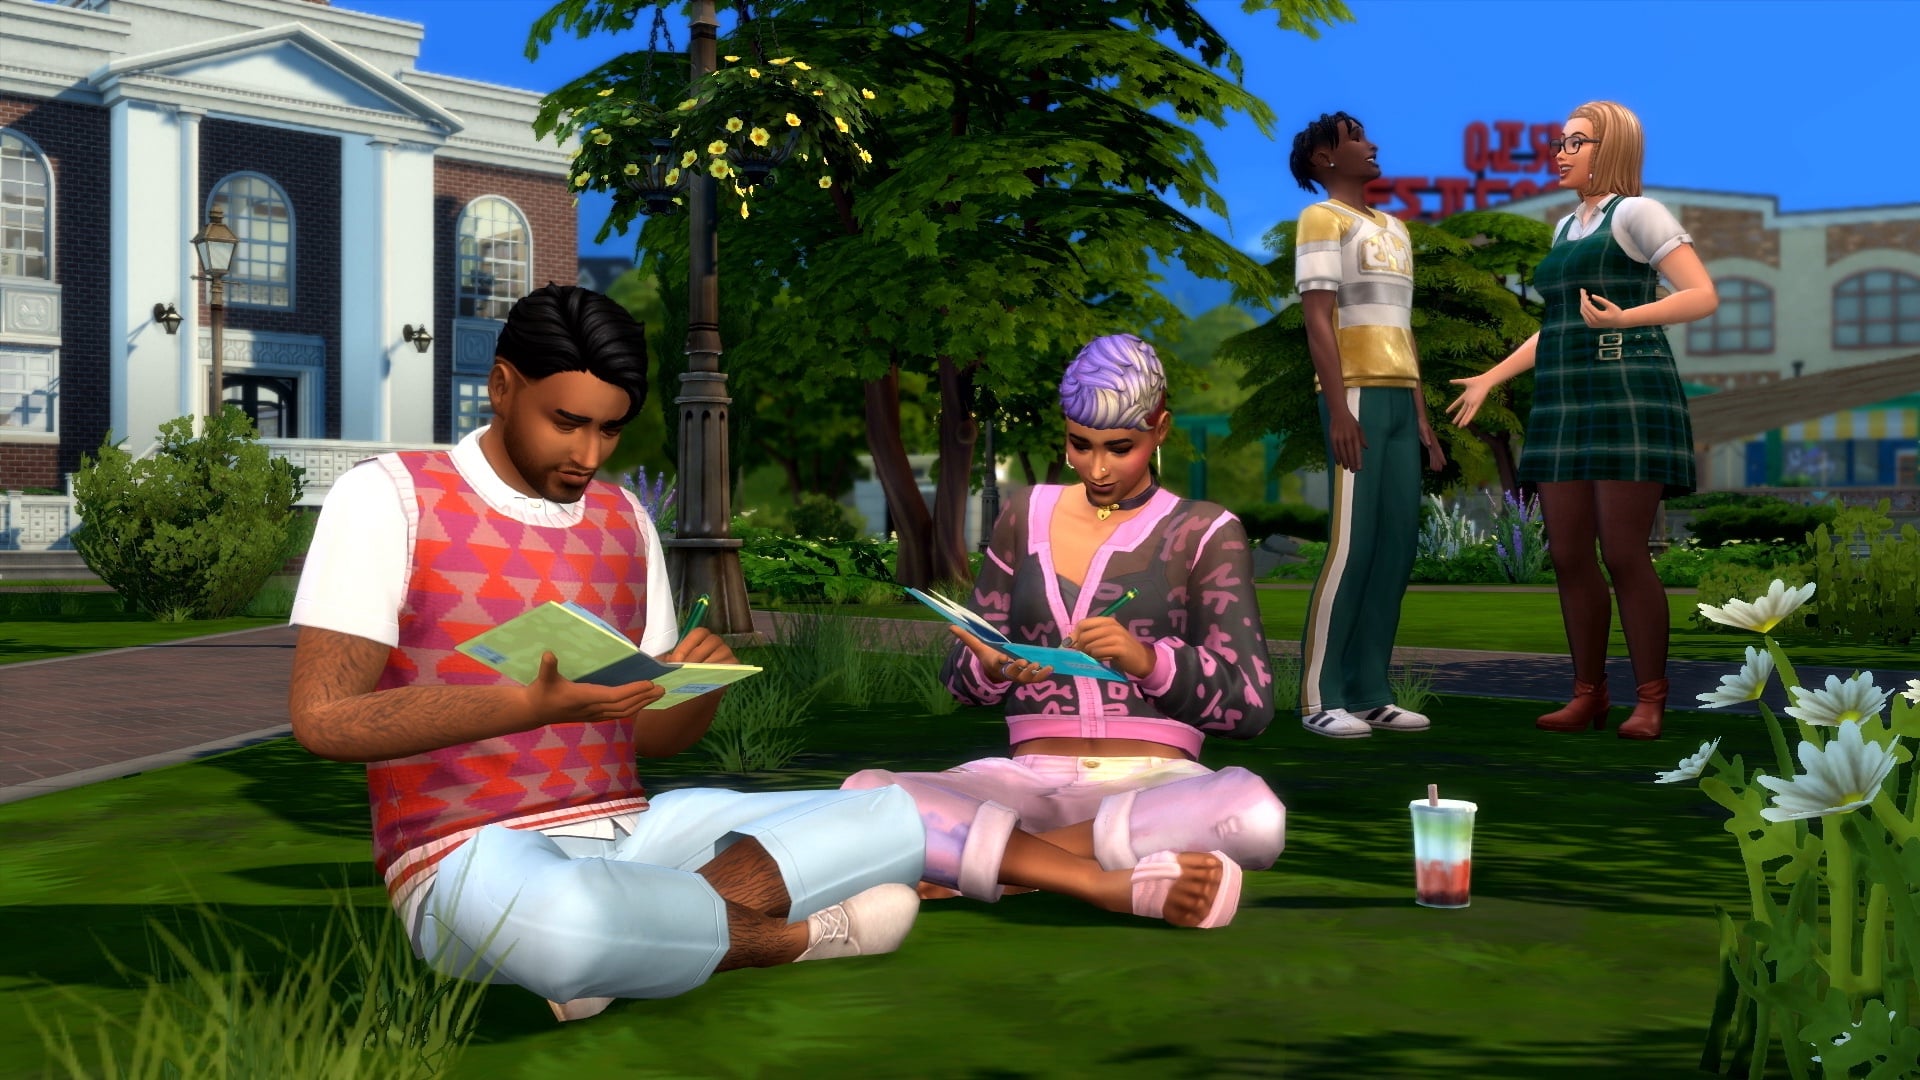 The Sims, the world's most popular life simulator, turned 20 years